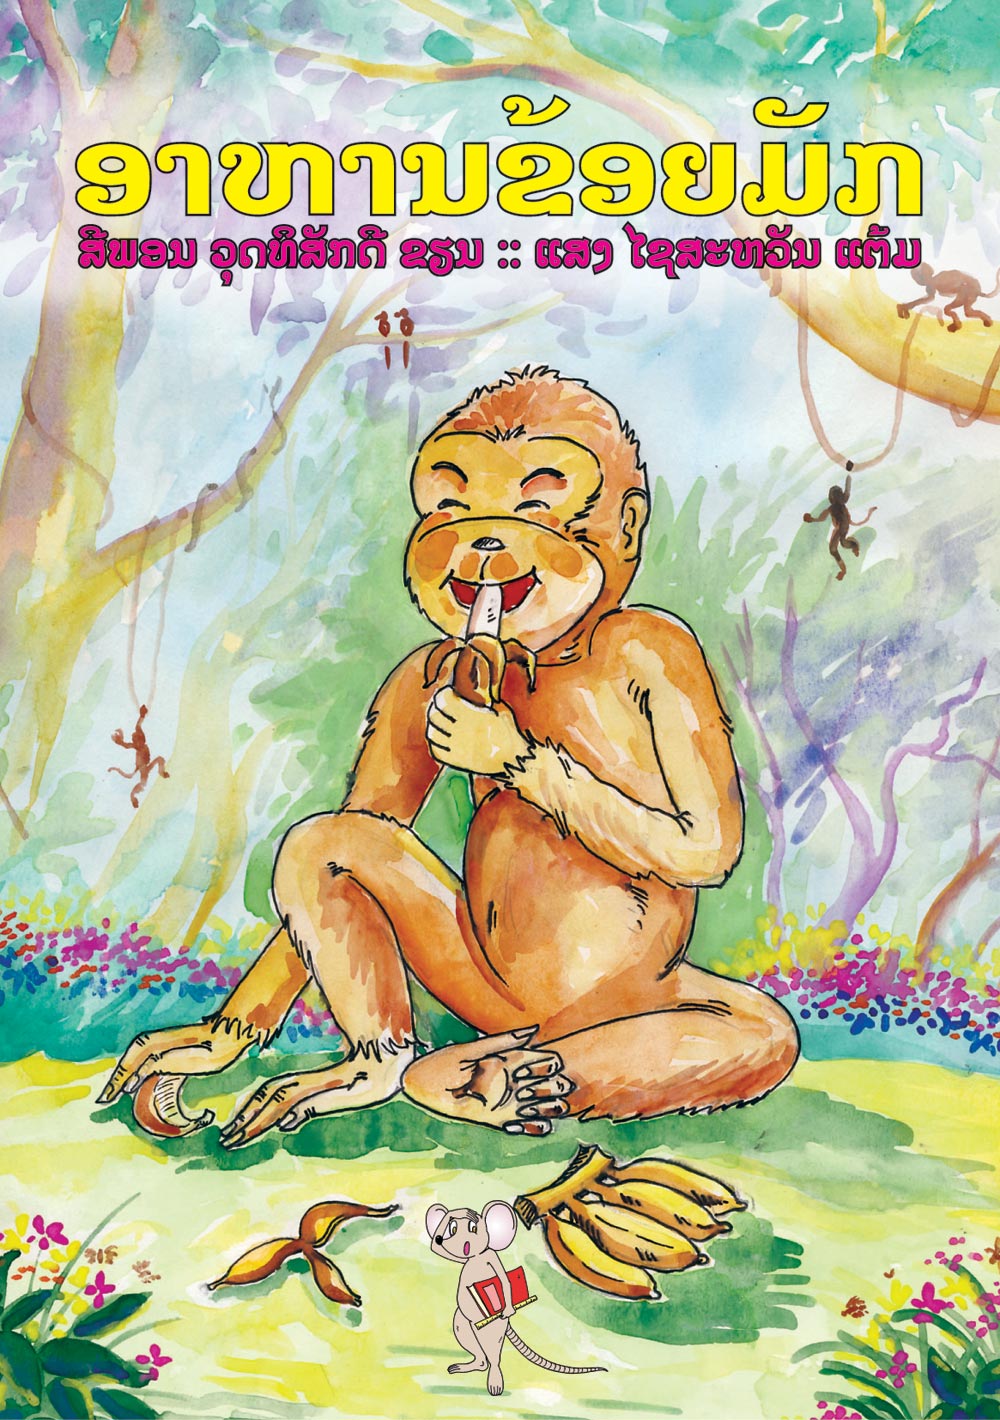 My Favorite Food large book cover, published in Lao language